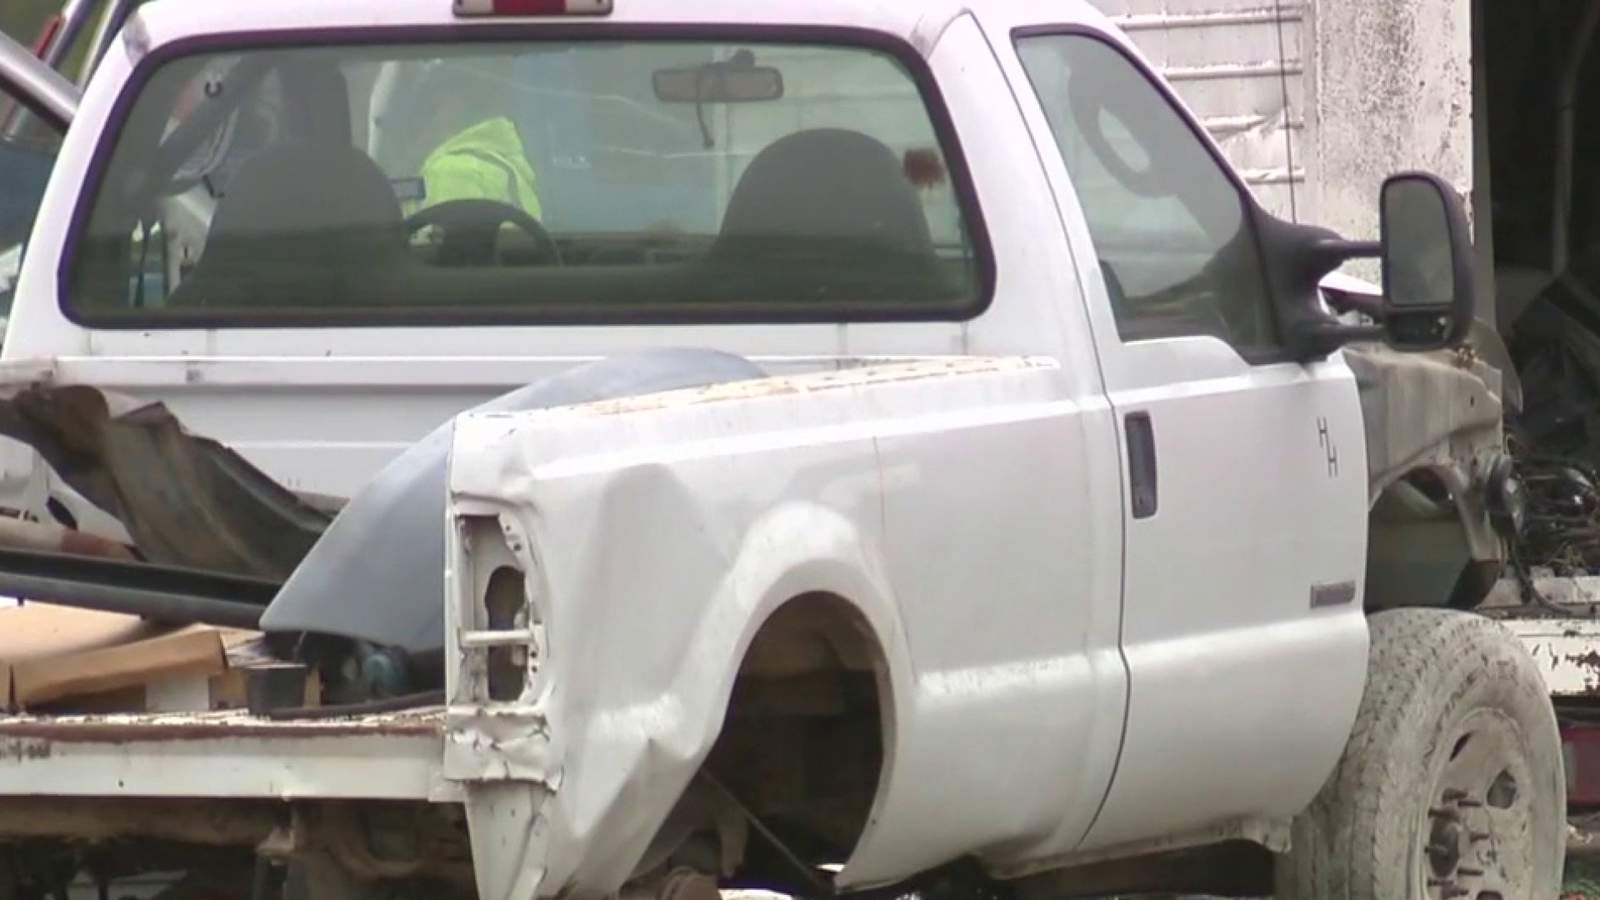 Vehicles, parts from suspected chop shop in SW Bexar County recovered, BCSO says